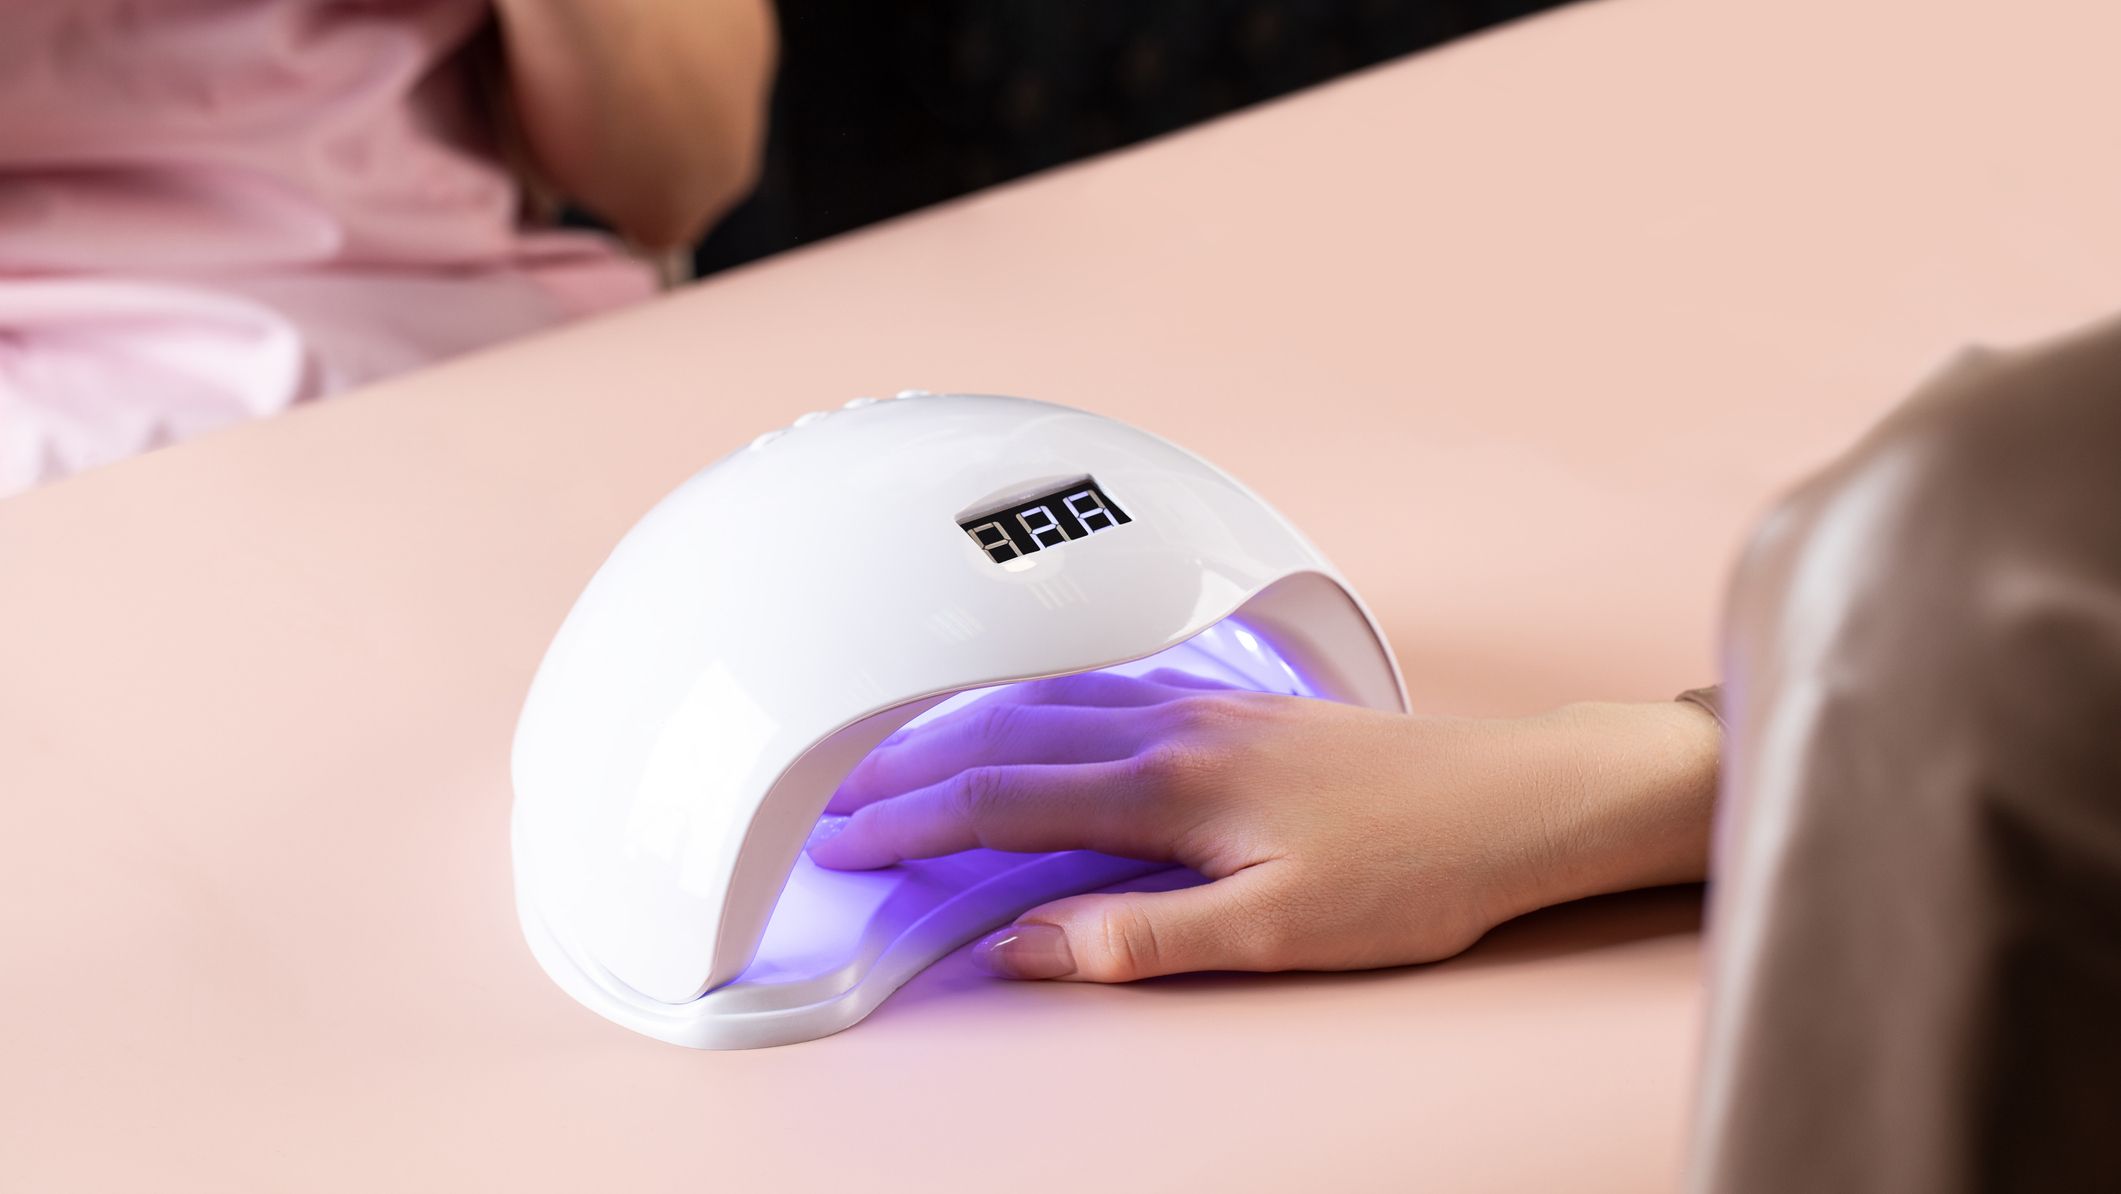 The Best Nail Lamp for Gel Manicures Is on Sale